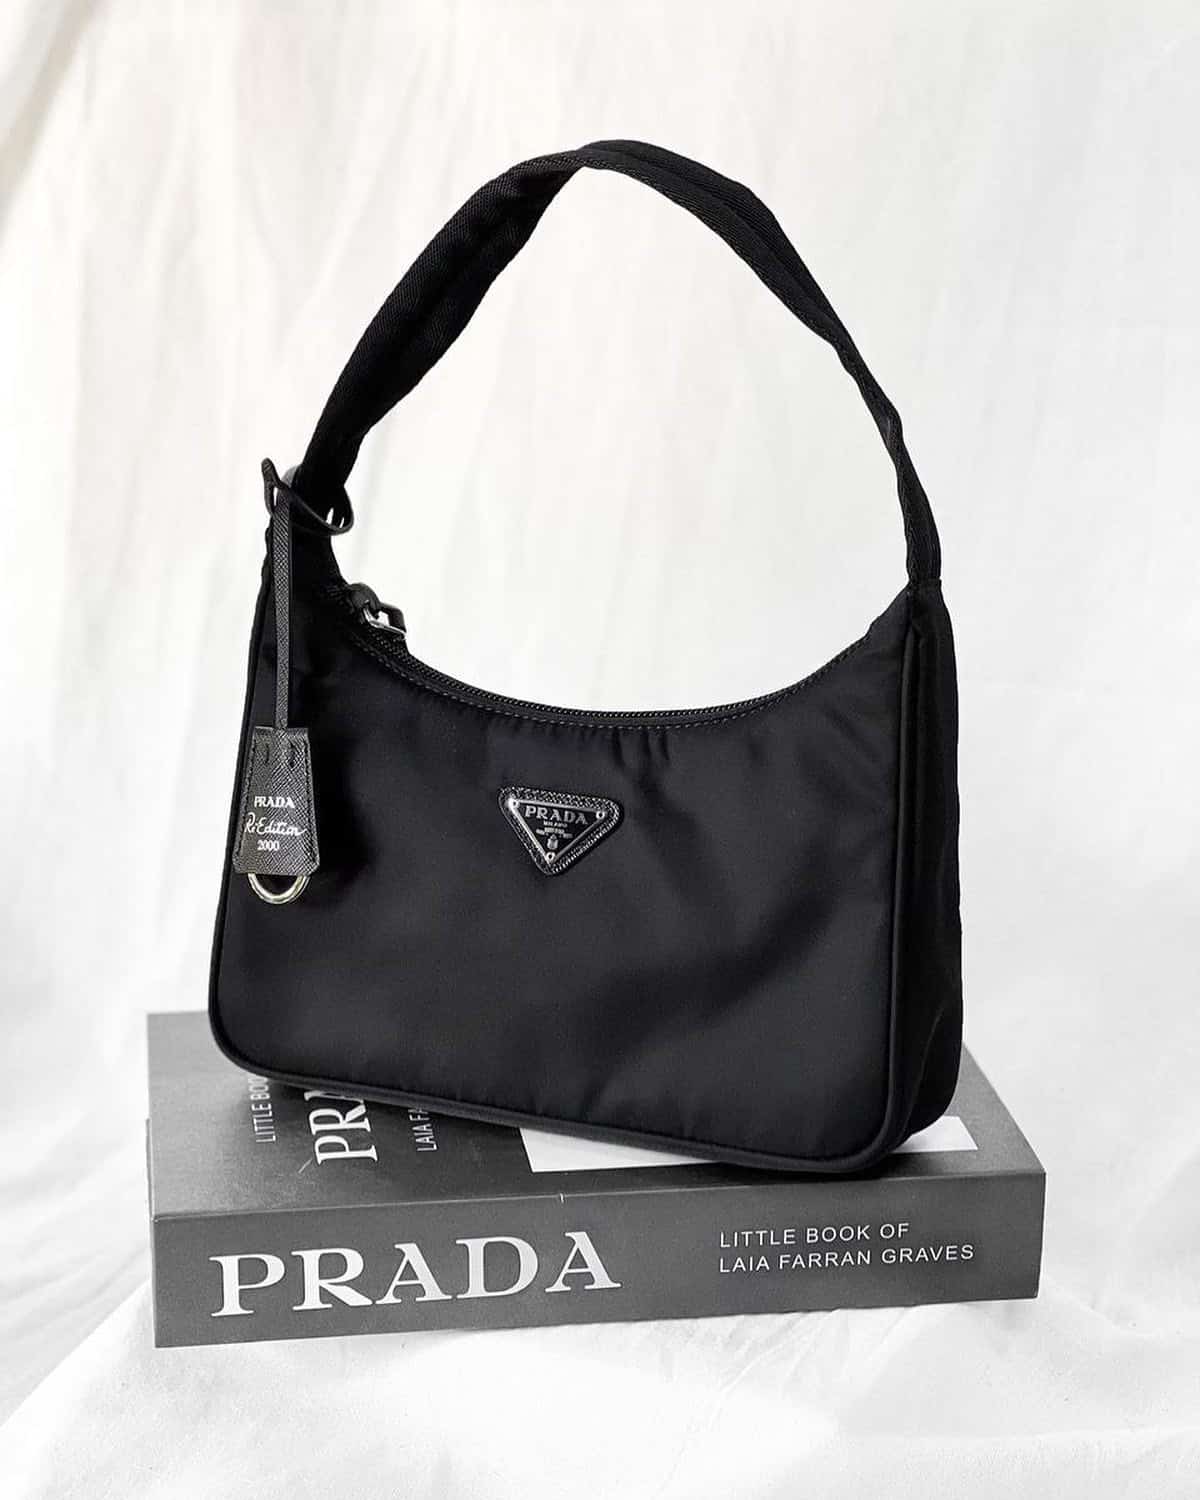 Cleaning a Prada bag at home